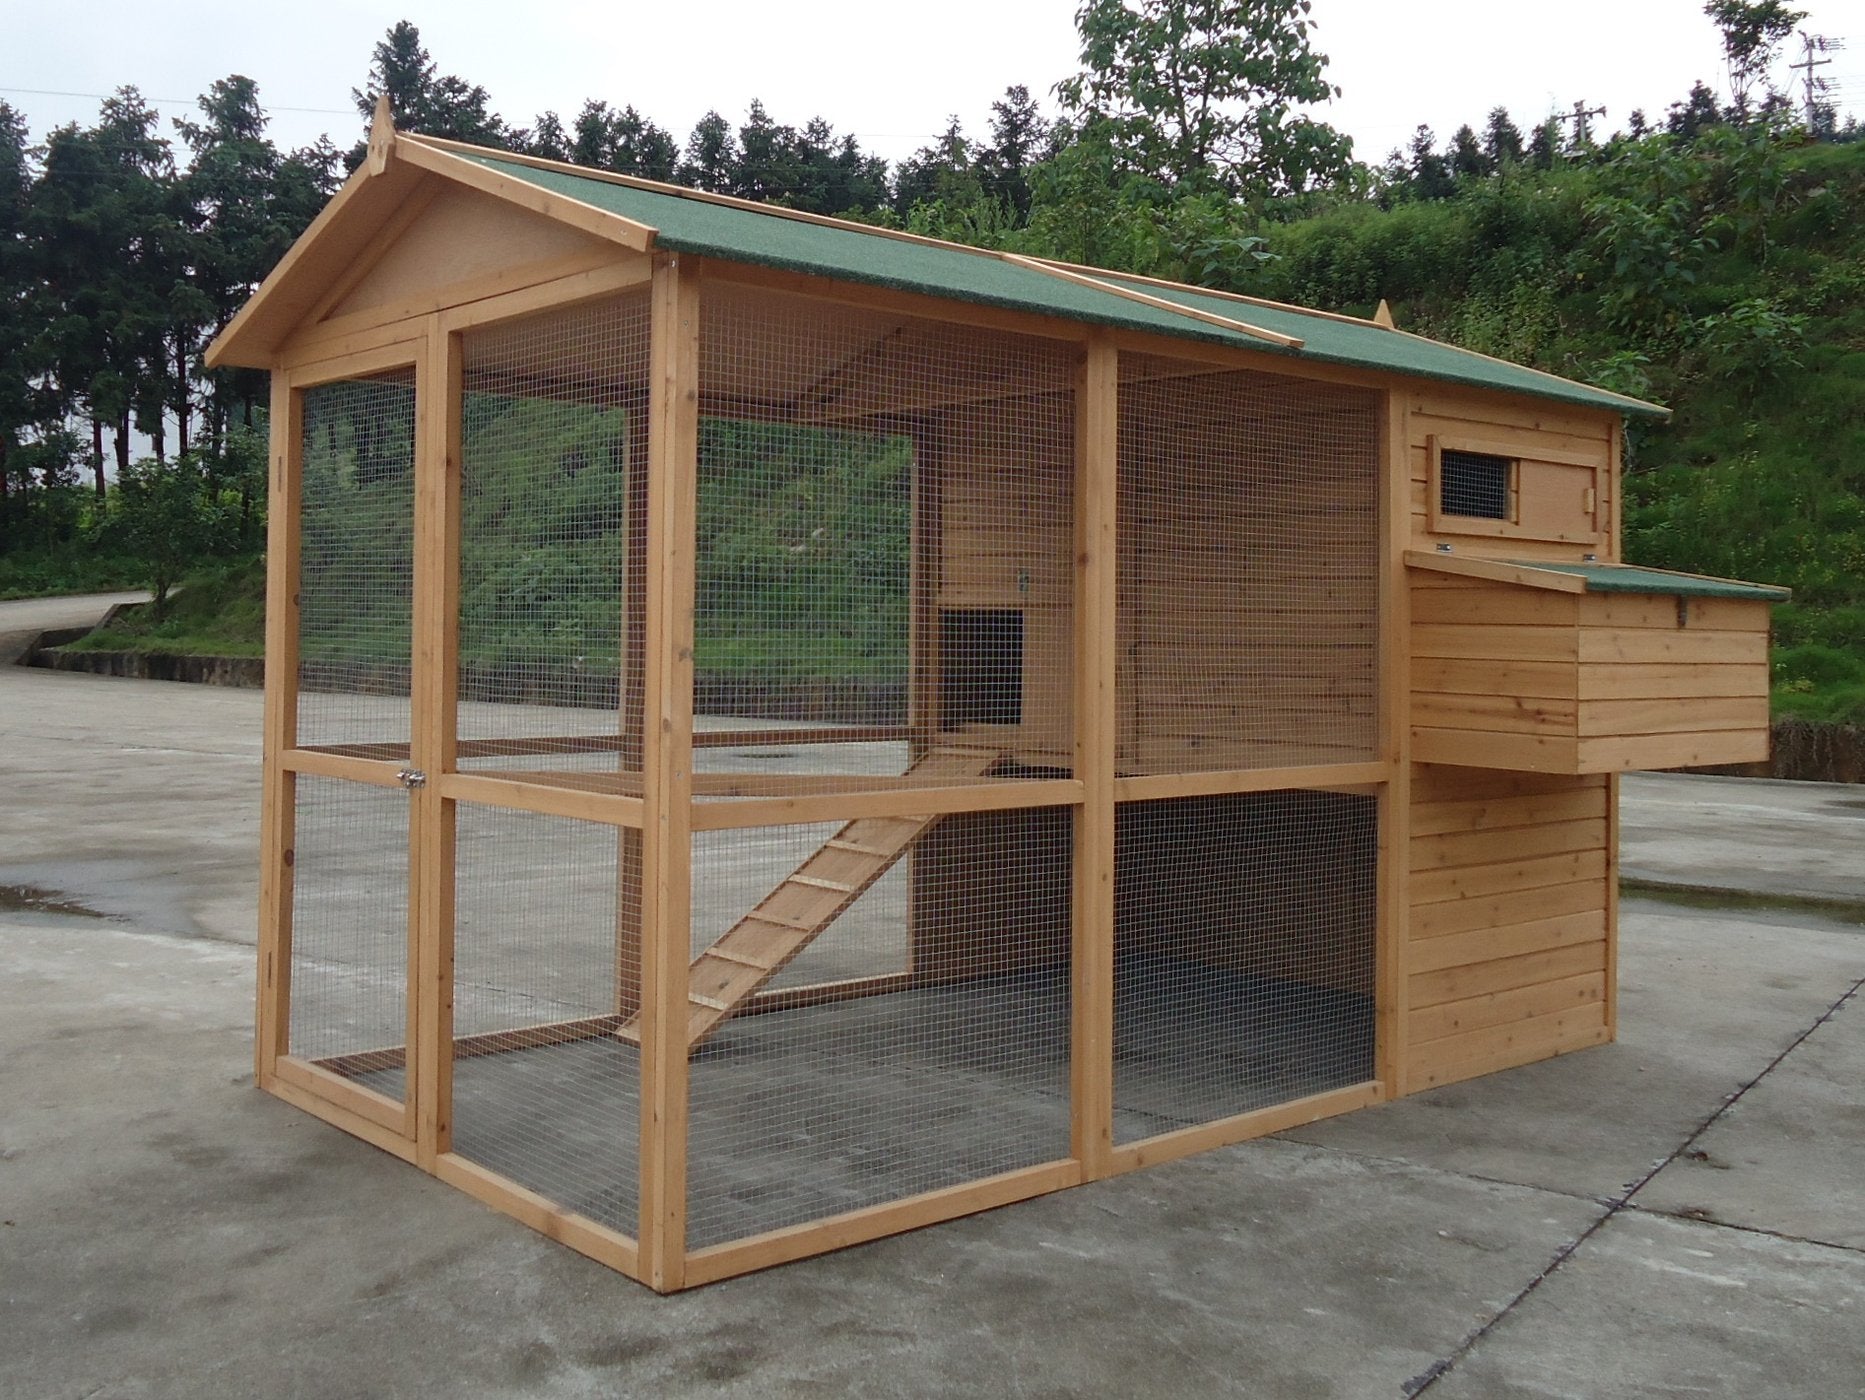 Quality Chicken Coops - Uk Chicken Coops - The Chicken House Company